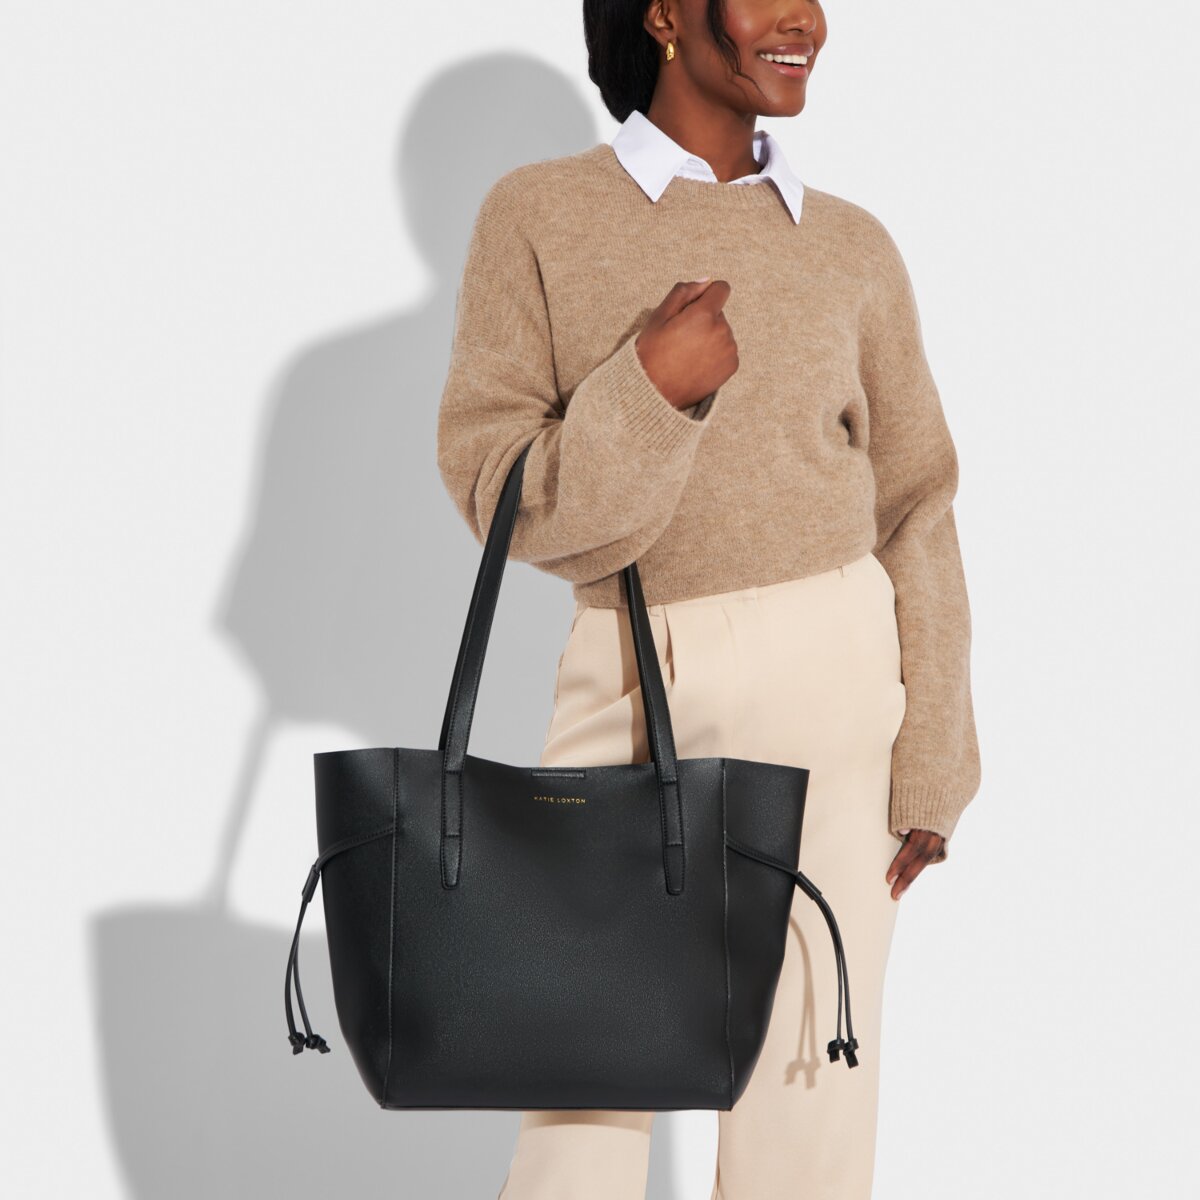 A model is holding the Ashley Tote Bag in Black.